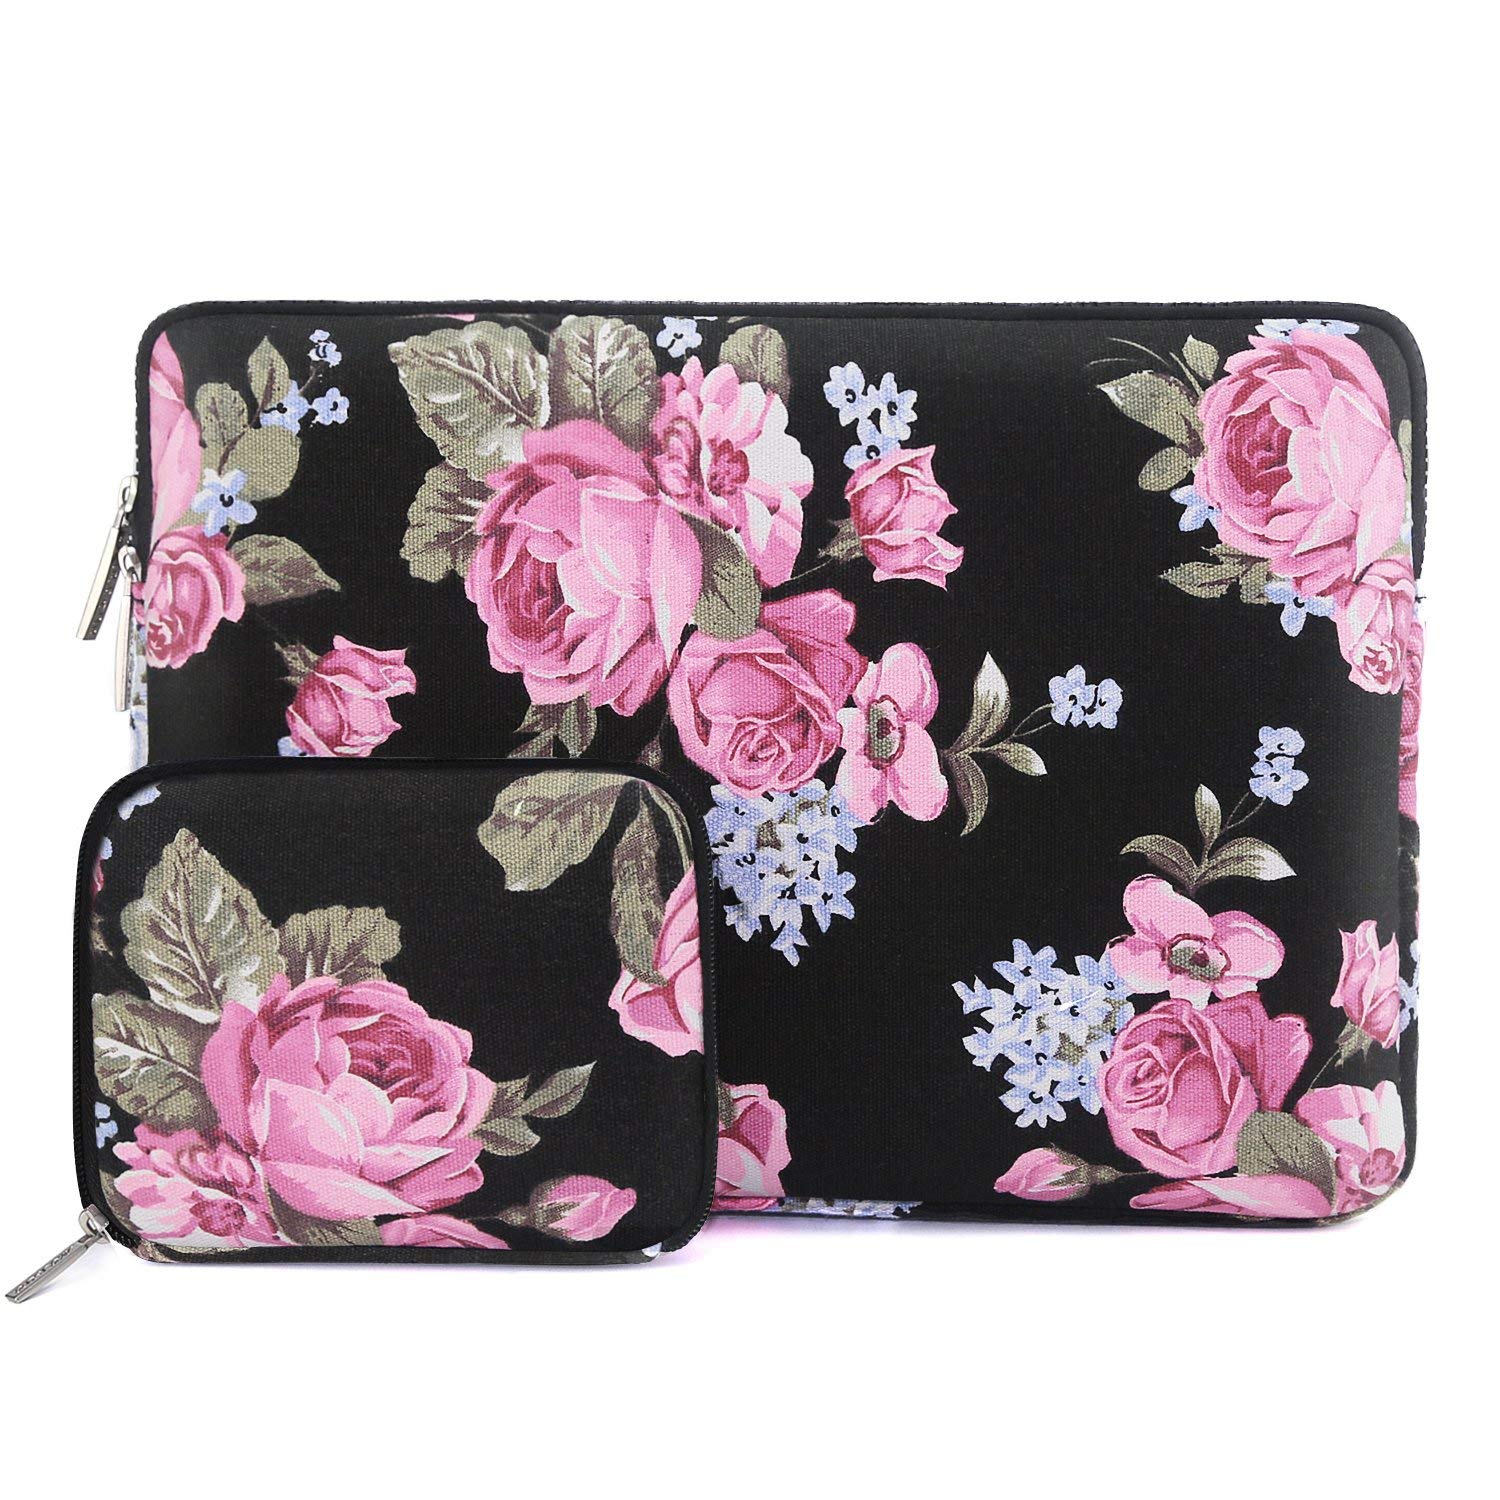 Mosiso 2017/2016 MacBook Pro 13 Inch Sleeve (A1706/A1708)/Microsoft New Surface Pro 2017/Surface Pro 4/3 Peony Pattern Canvas Laptop Bag Protective Carrying Cover with Small Case, Black - image 1 of 6